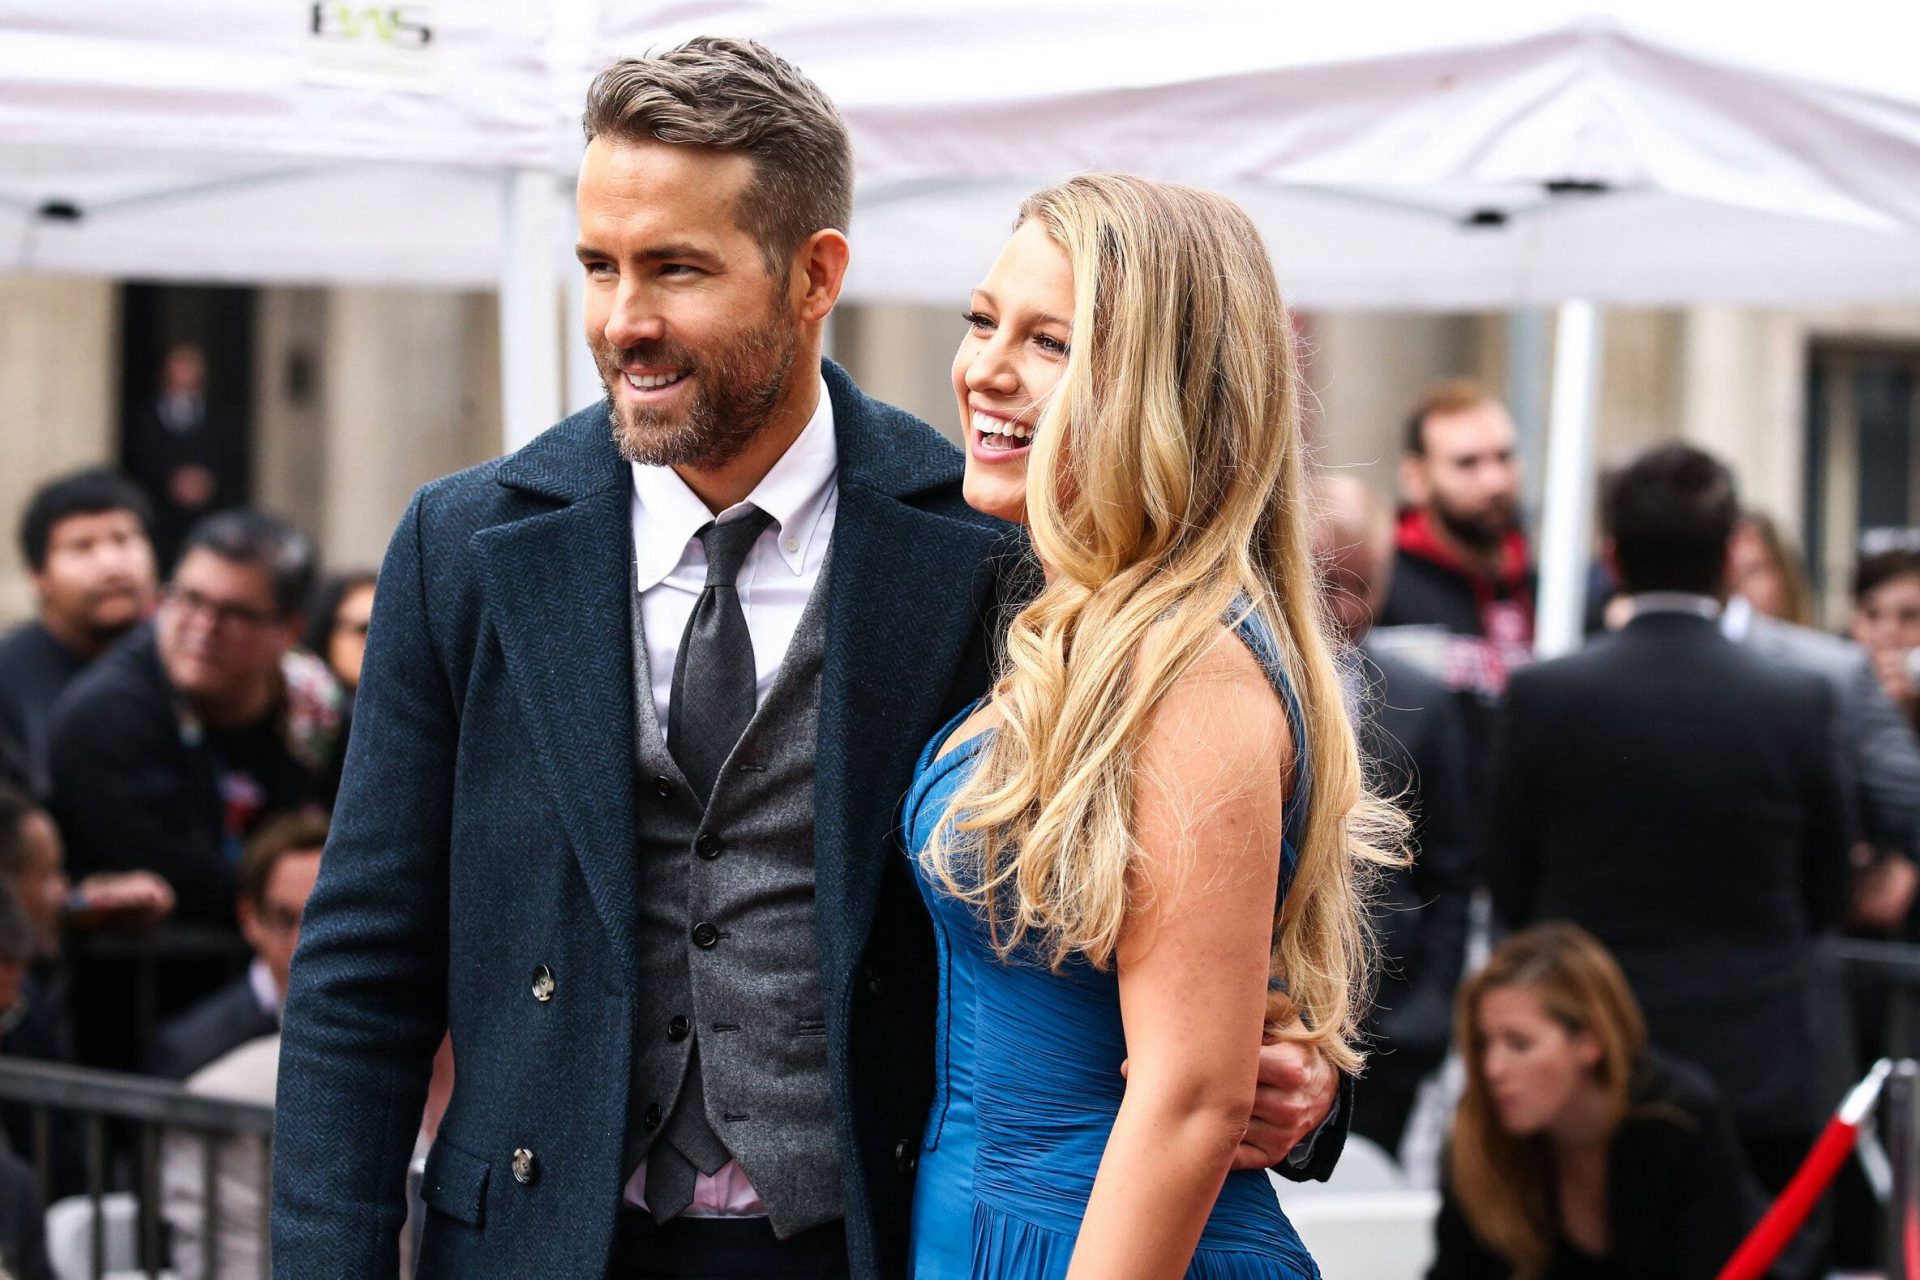 The worst Ryan Reynolds movie ever is hovering up Netflix’s charts